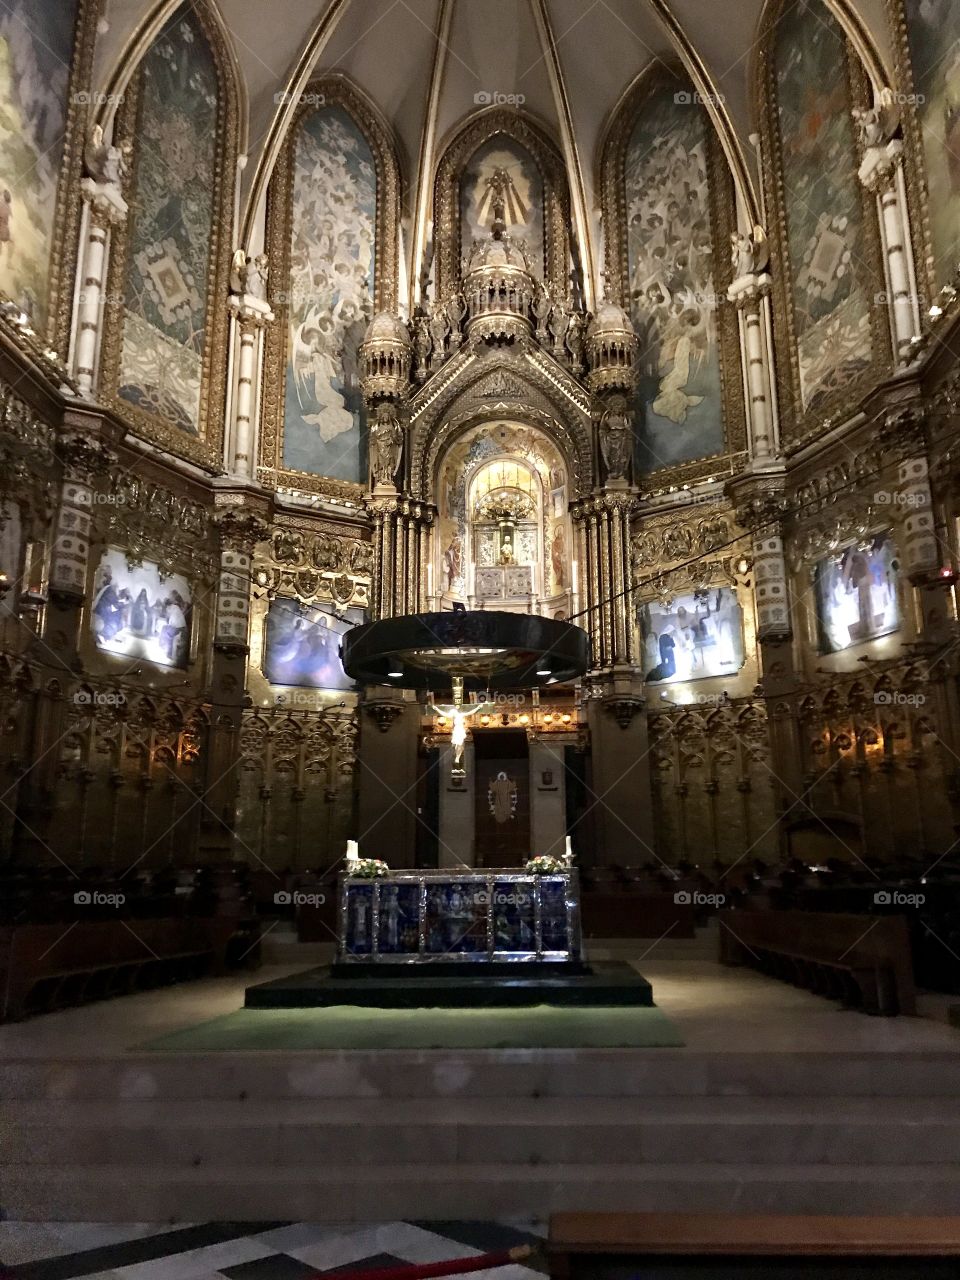 In the scared Cathedral of Montserrat, the Black Madonna is seated above the alter.